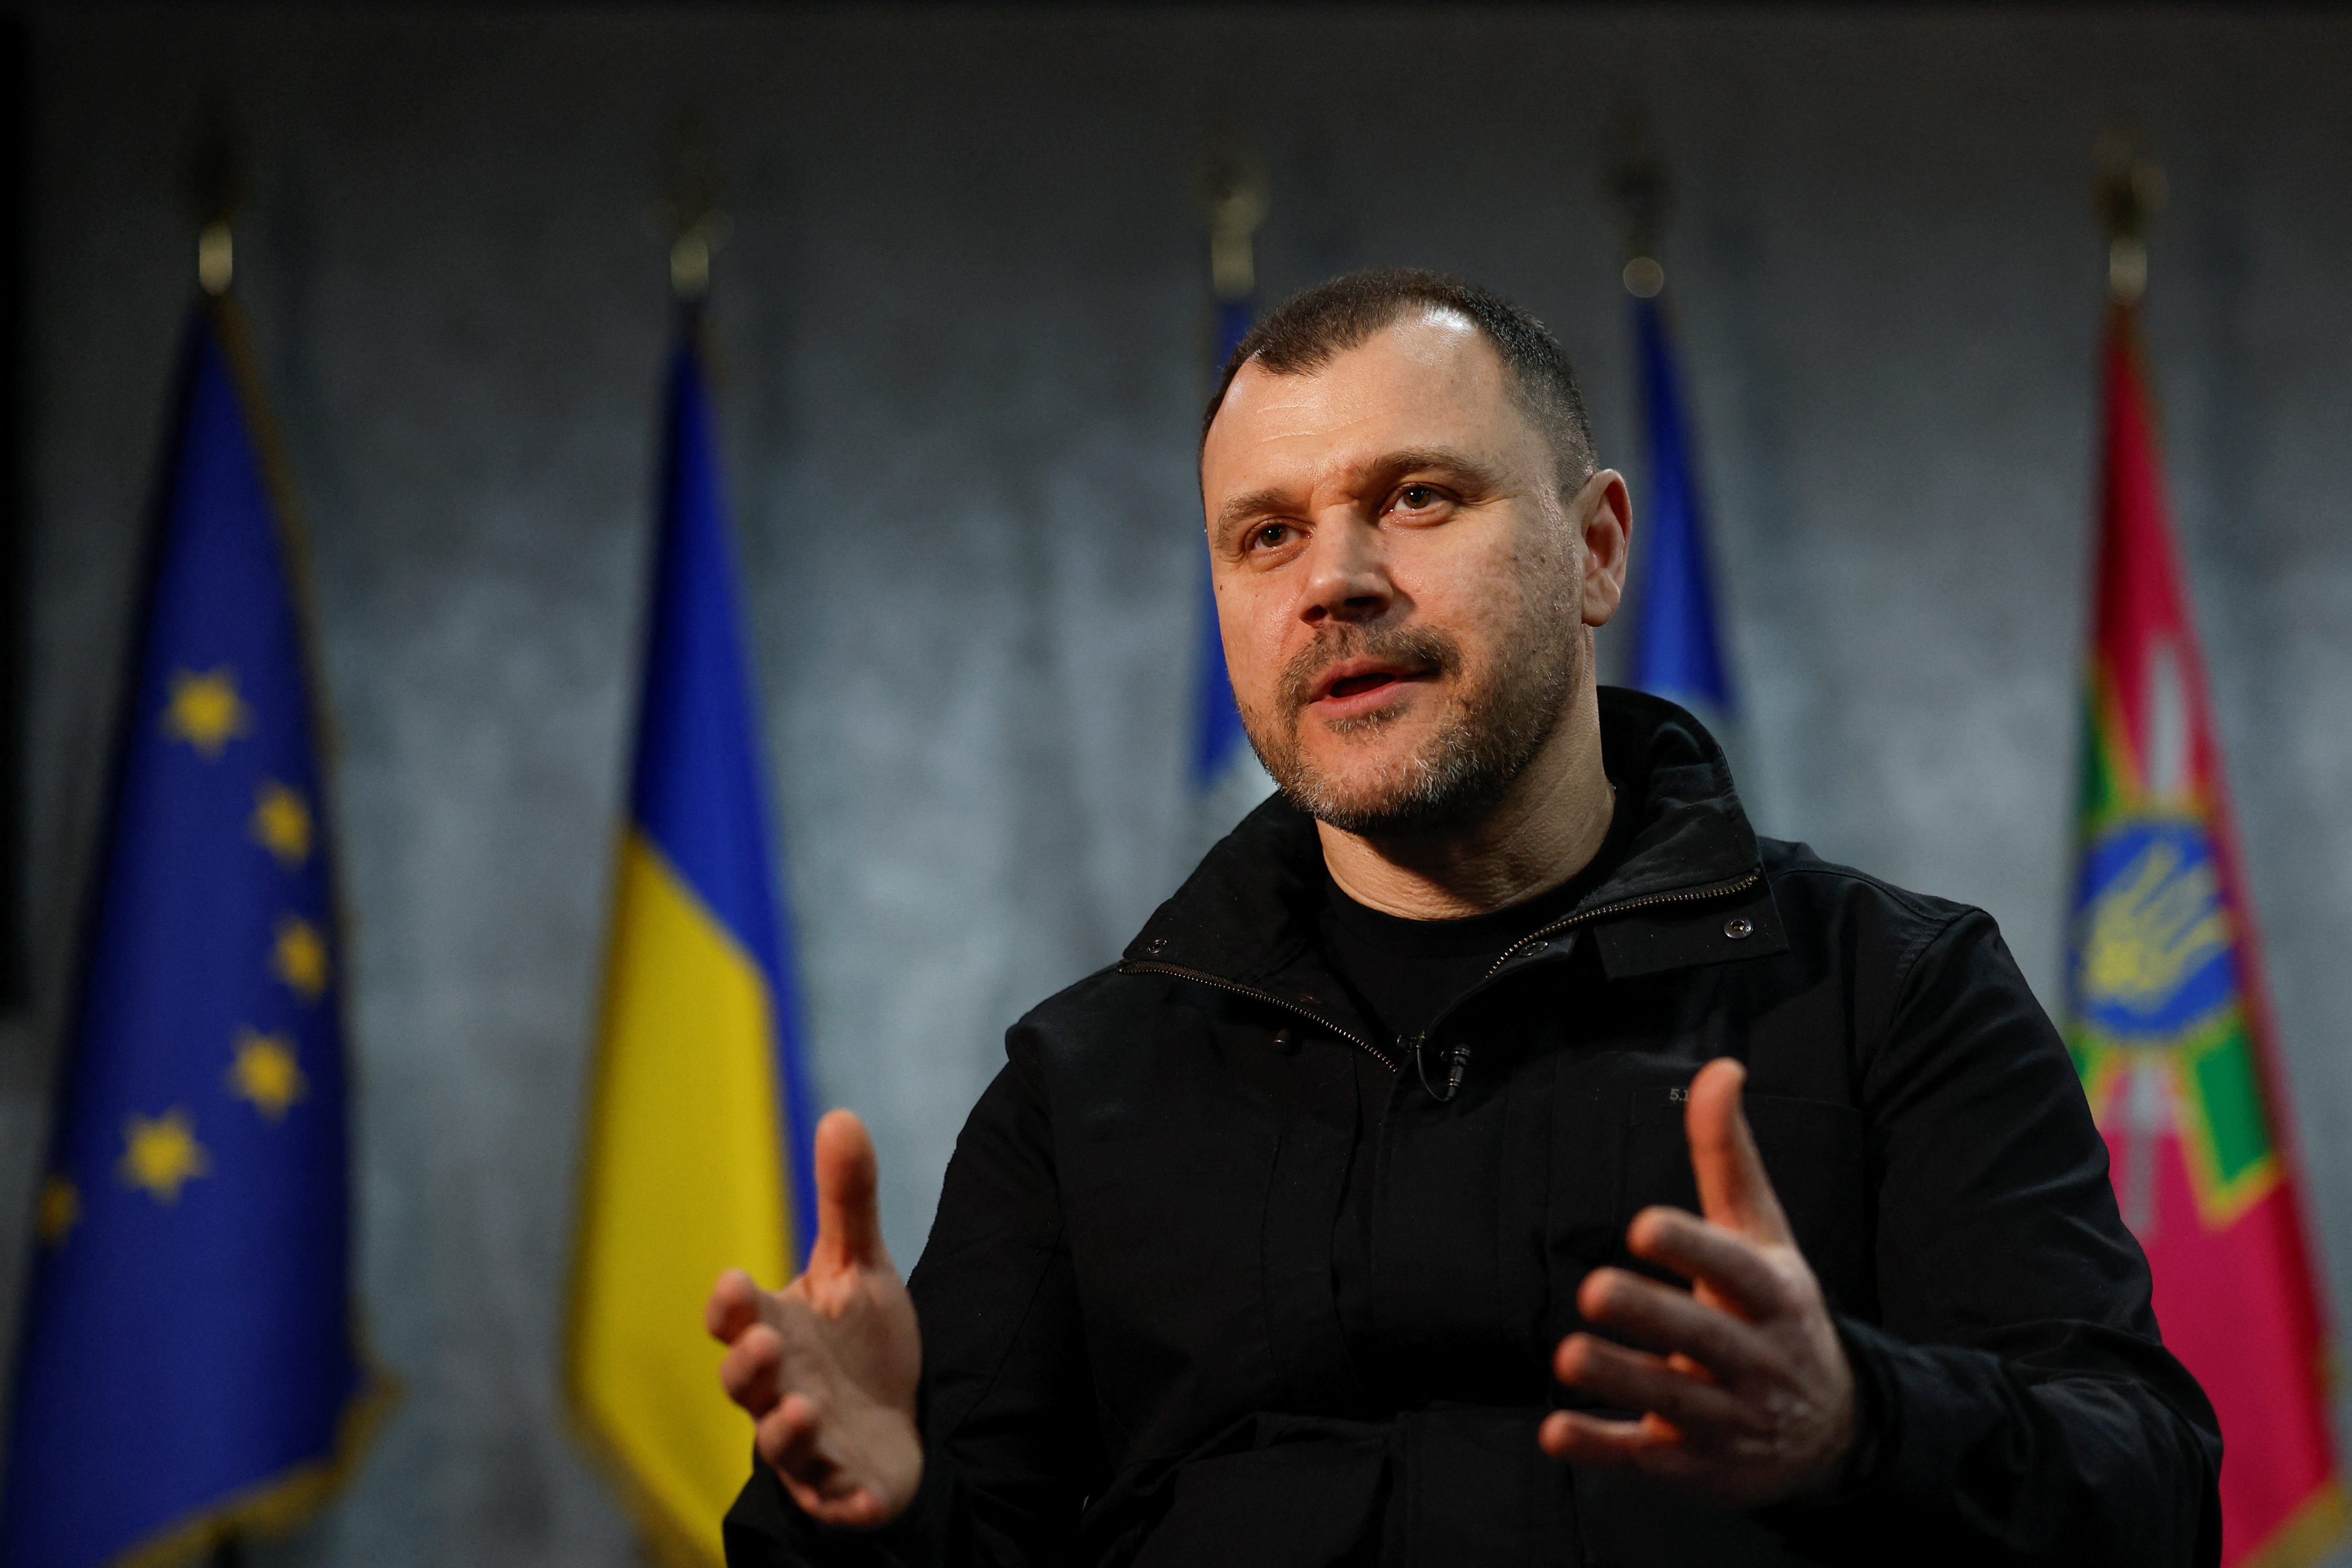 Ukraine's Interior Minister Klymenko speaks during an interview with Reuters in Kyiv